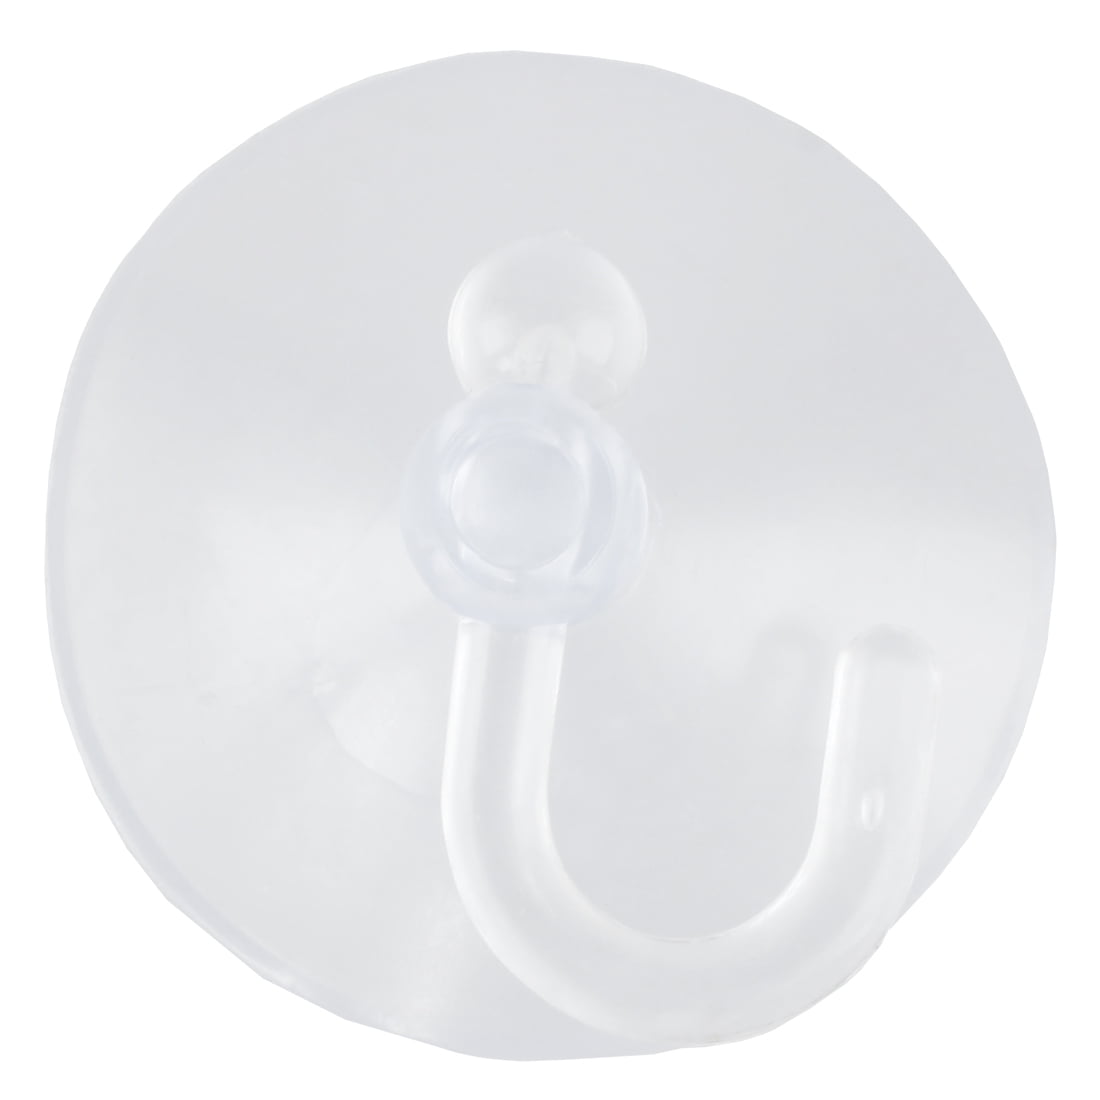 5pcs Bathroom Kitchen Glass Clear Suction Cup Hook Wall Hangers P0JB